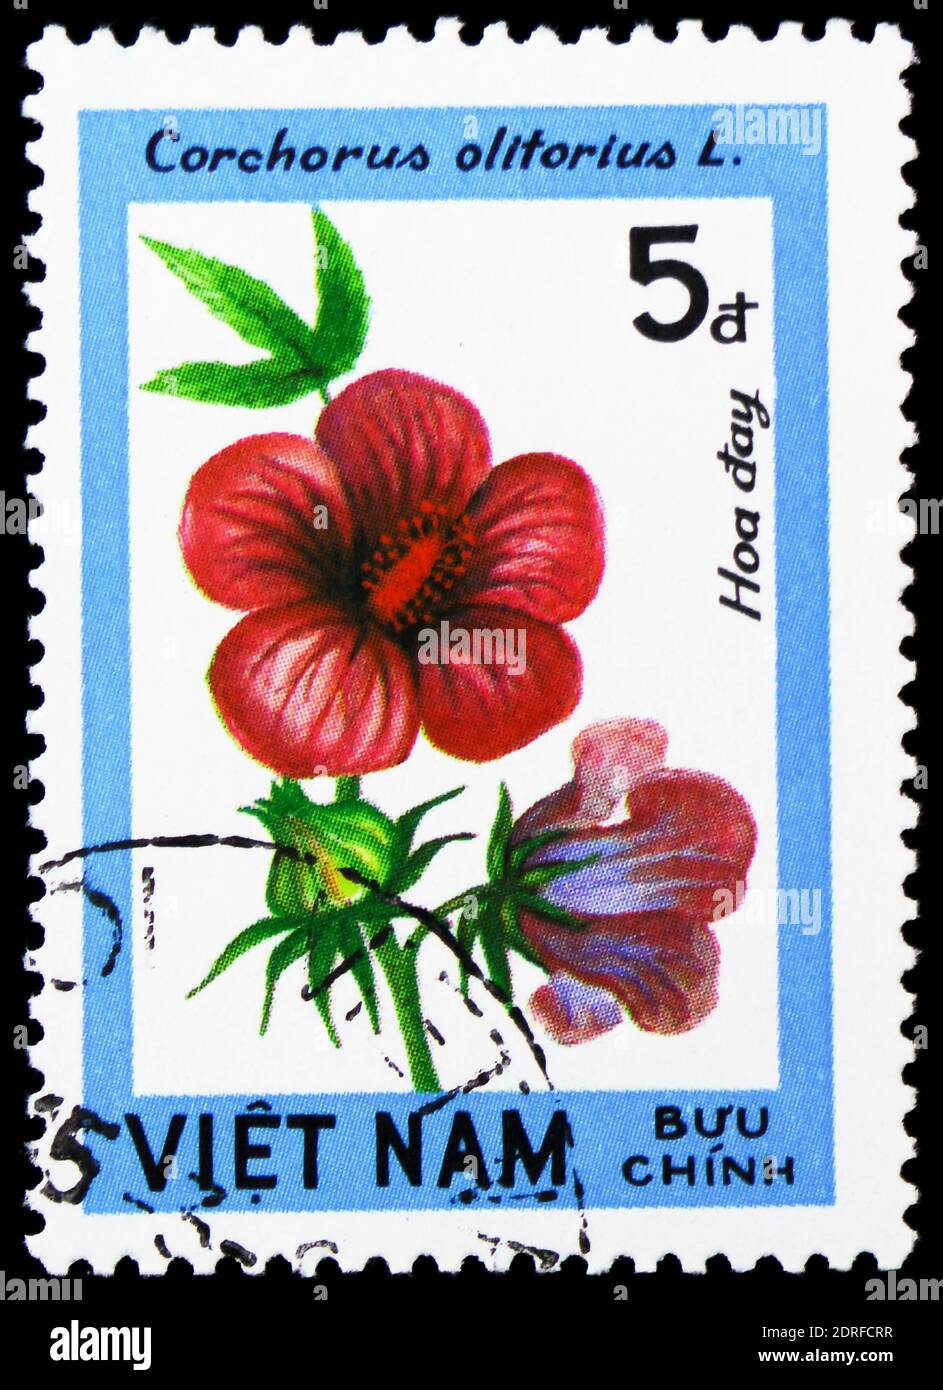 MOSCOW, RUSSIA - JANUARY 4, 2019: A stamp printed in Vietnam shows Corchorus olitorius, Blossoming Woody Plants serie, circa 1984 Stock Photo